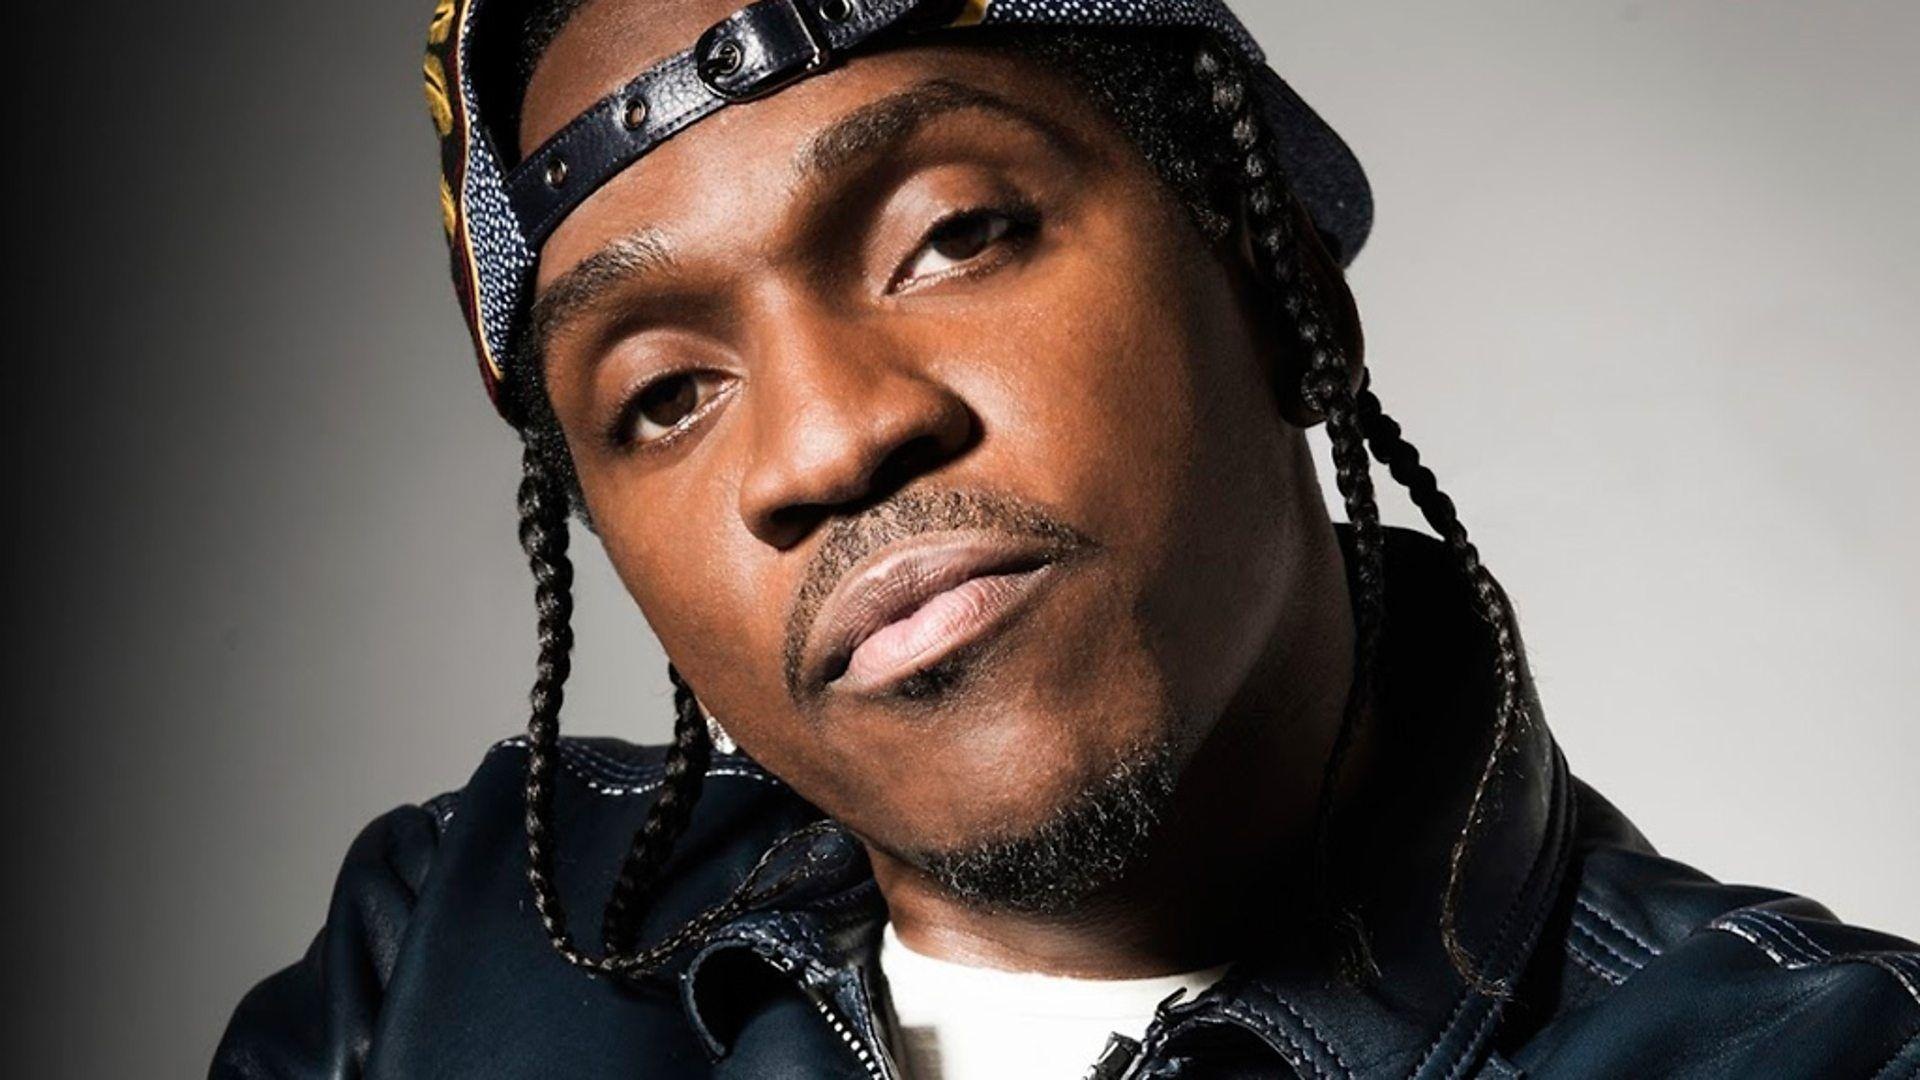 Pusha T Wallpapers 1920x1080